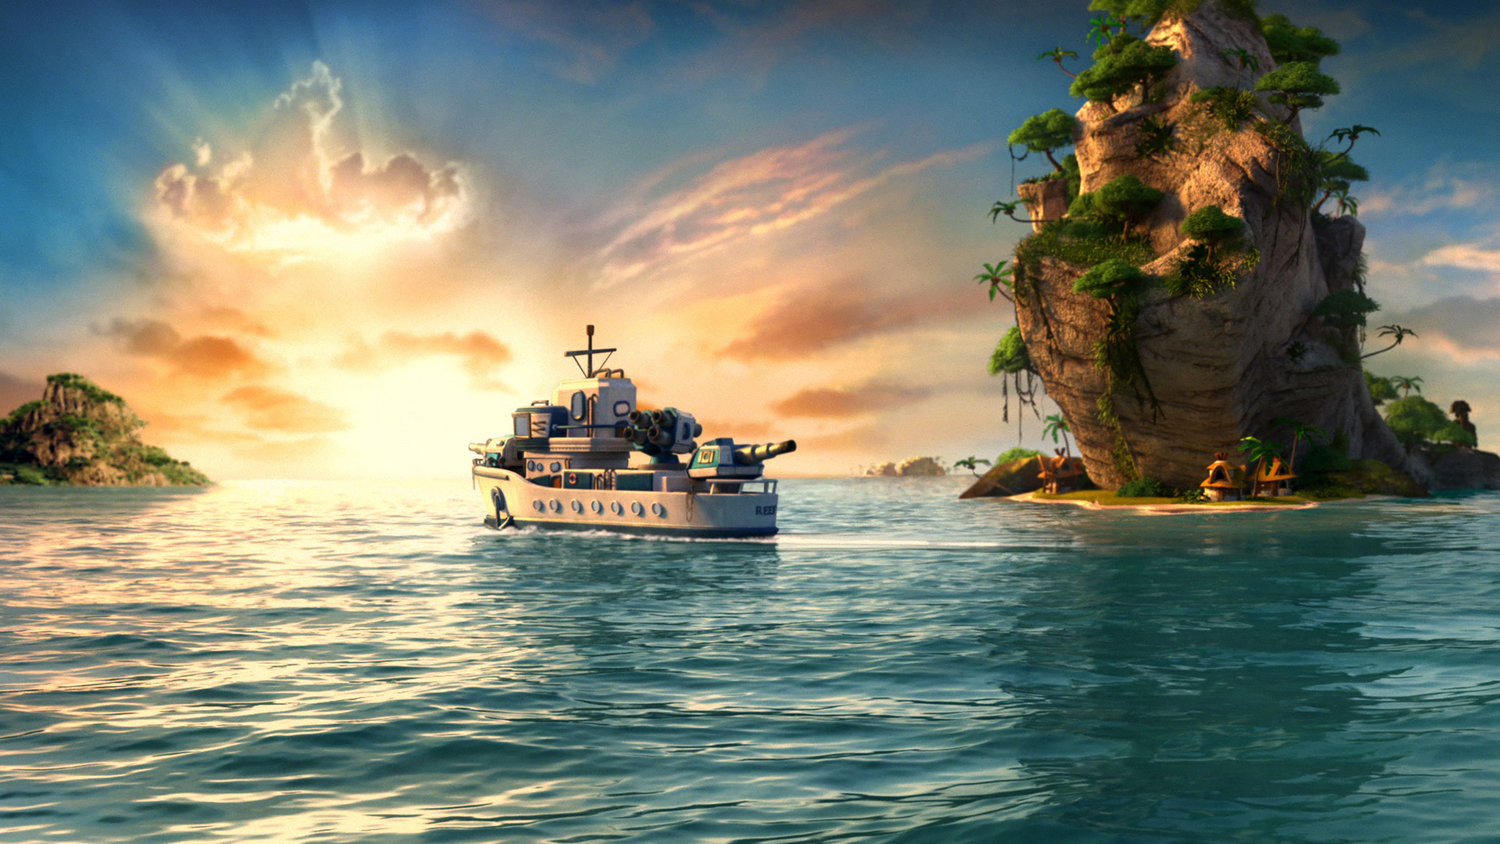 Boom Beach HD Wallpaper Full Pictures